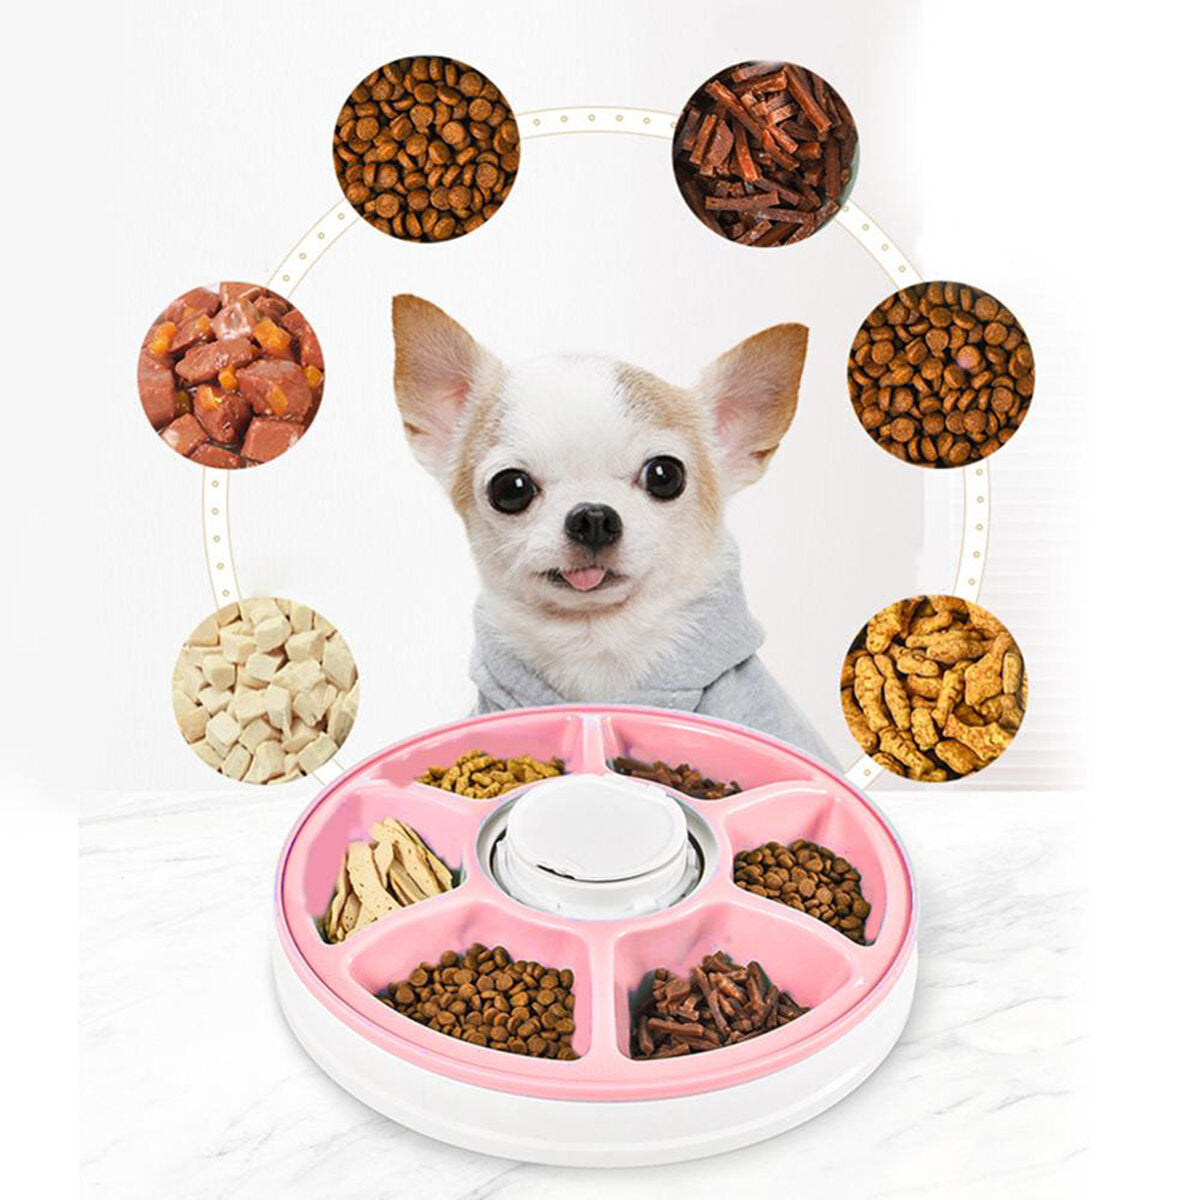 5 Meal Automatic Dog and Cat Feeder Dispenser for Dogs Cats & Small AnimalsWet / Dry Food Universal With Digital Timer Clock